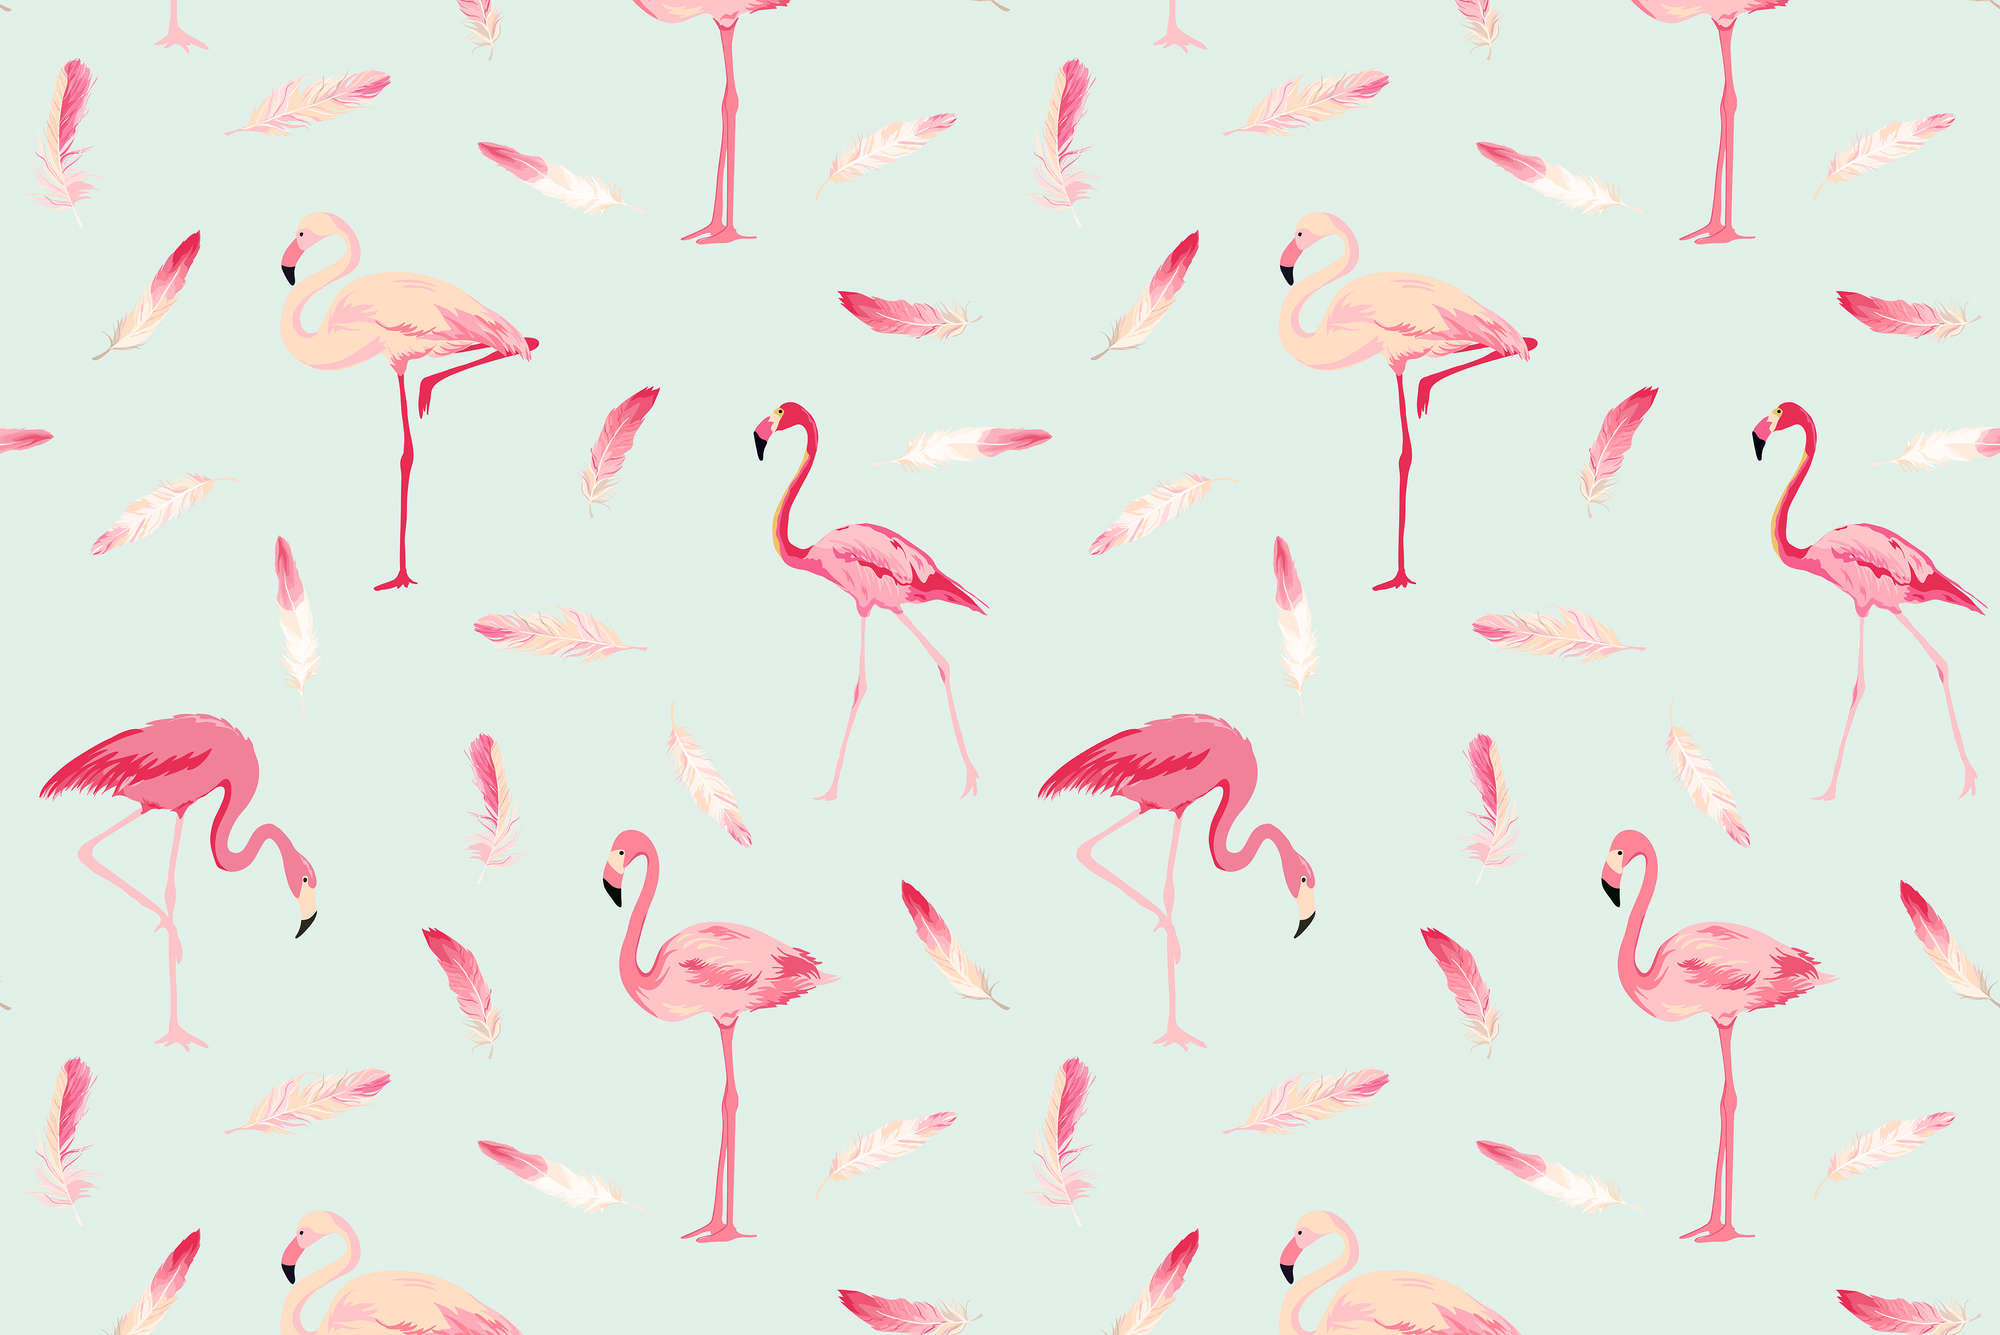             Graphic mural flamingos and feathers on mother of pearl smooth fleece
        